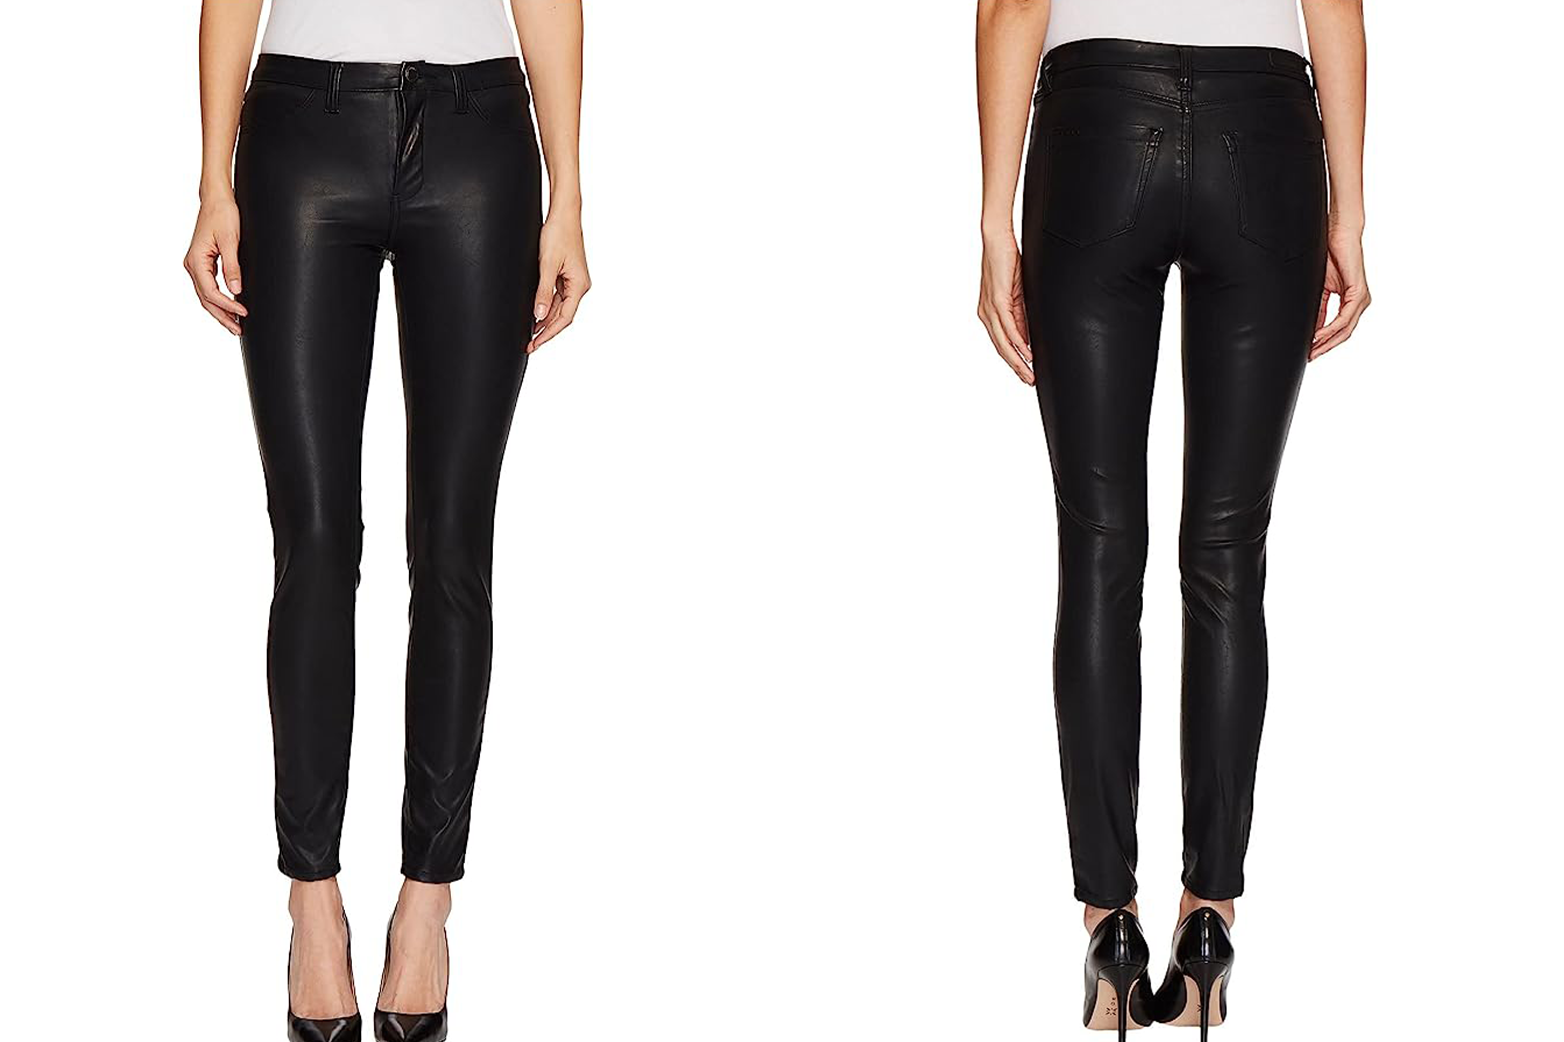 Blank NYC Faux-Leather Jeggings being modeled front and back